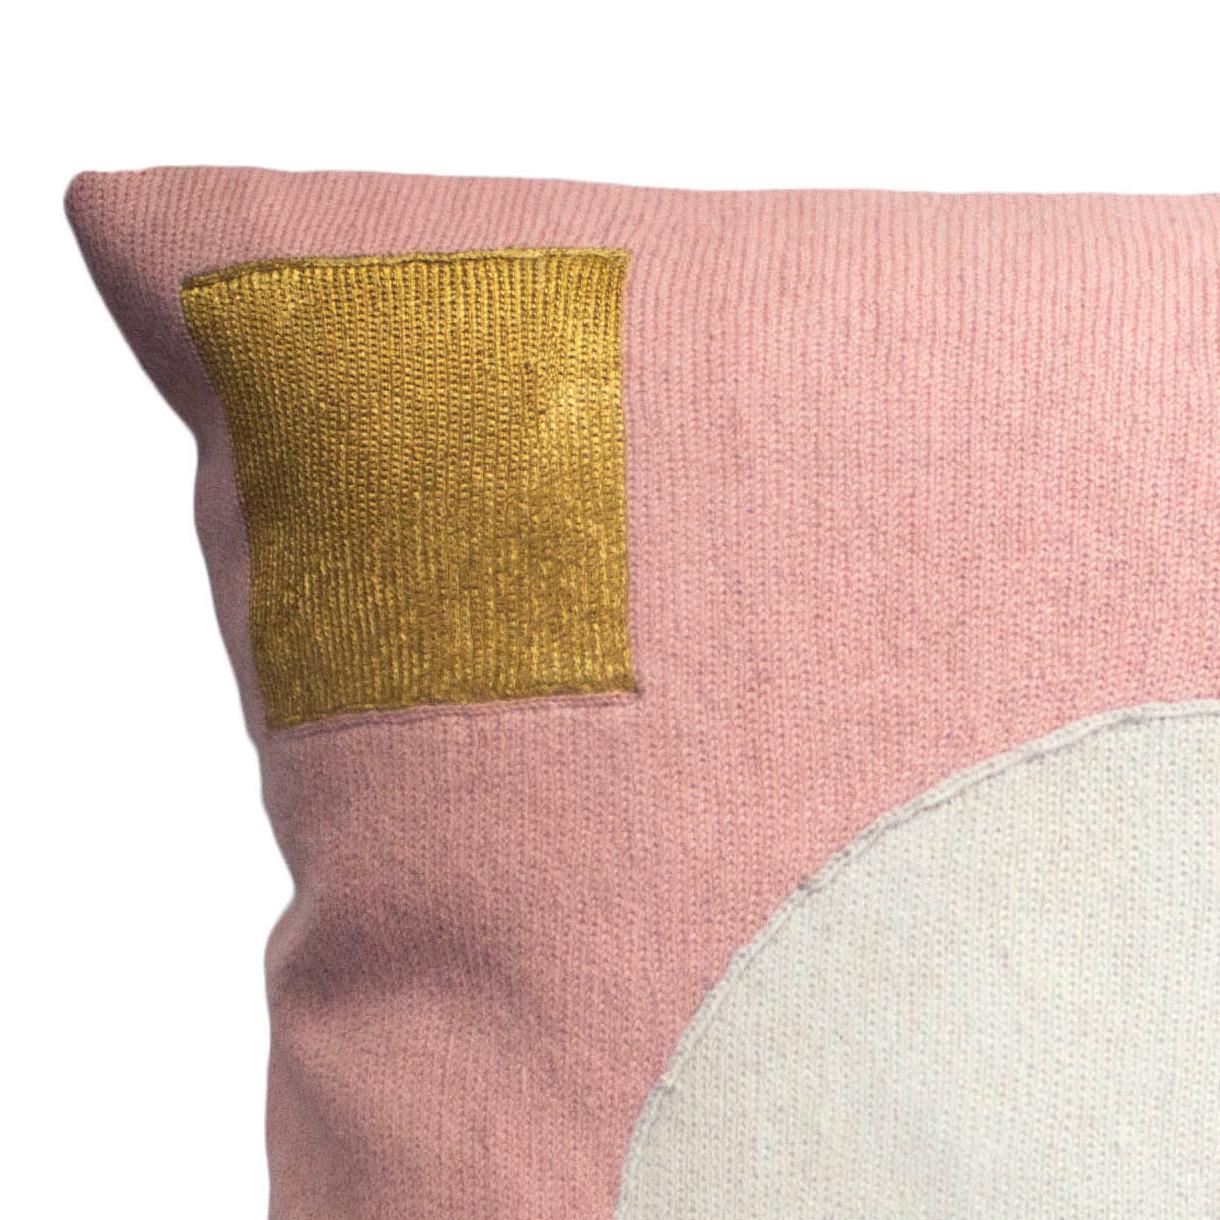 This pillow has been hand embroidered by artisans in Kashmir, India, using a traditional embroidery technique which is native to this region.

The purchase of this handcrafted pillow helps to support the artisans and preserve their craft.

We